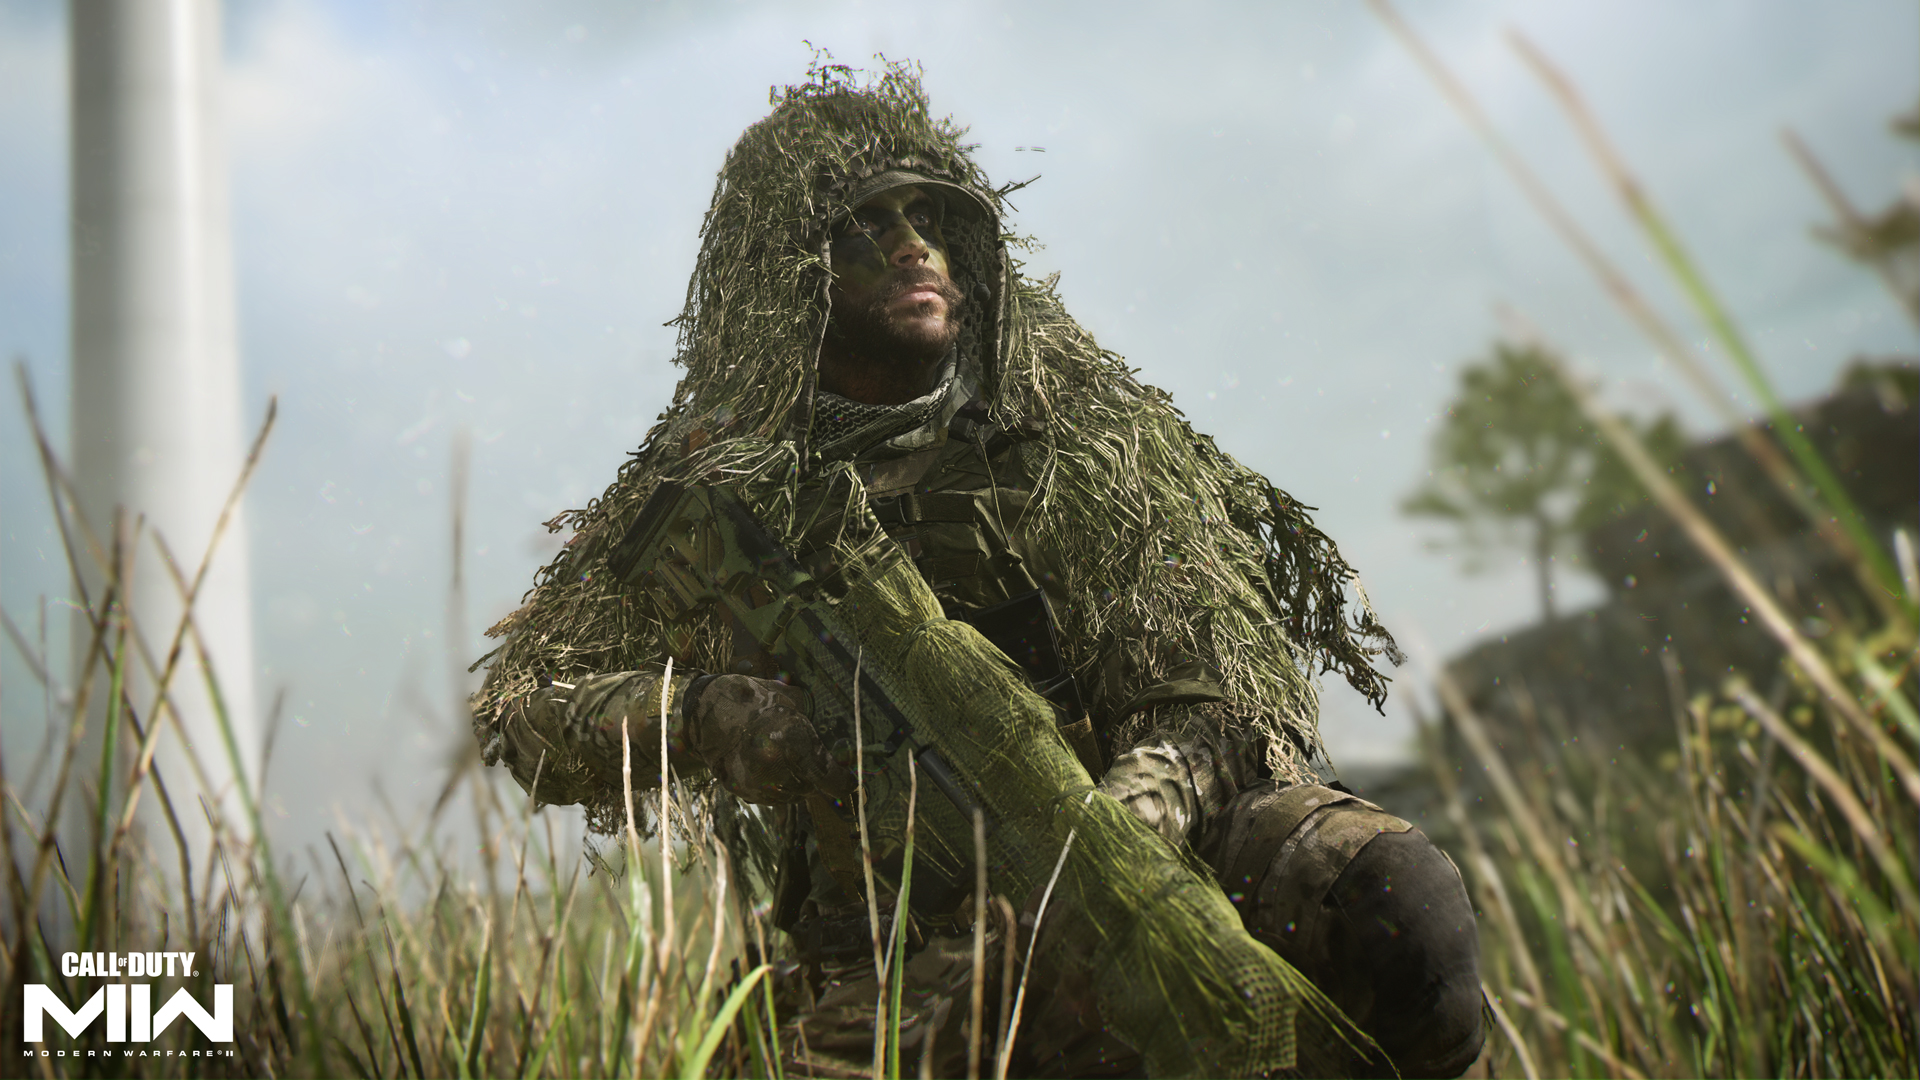 A soldier wearing a ghillie suit crouches in a field of grass in a still from Call of Duty: Modern Warfare II